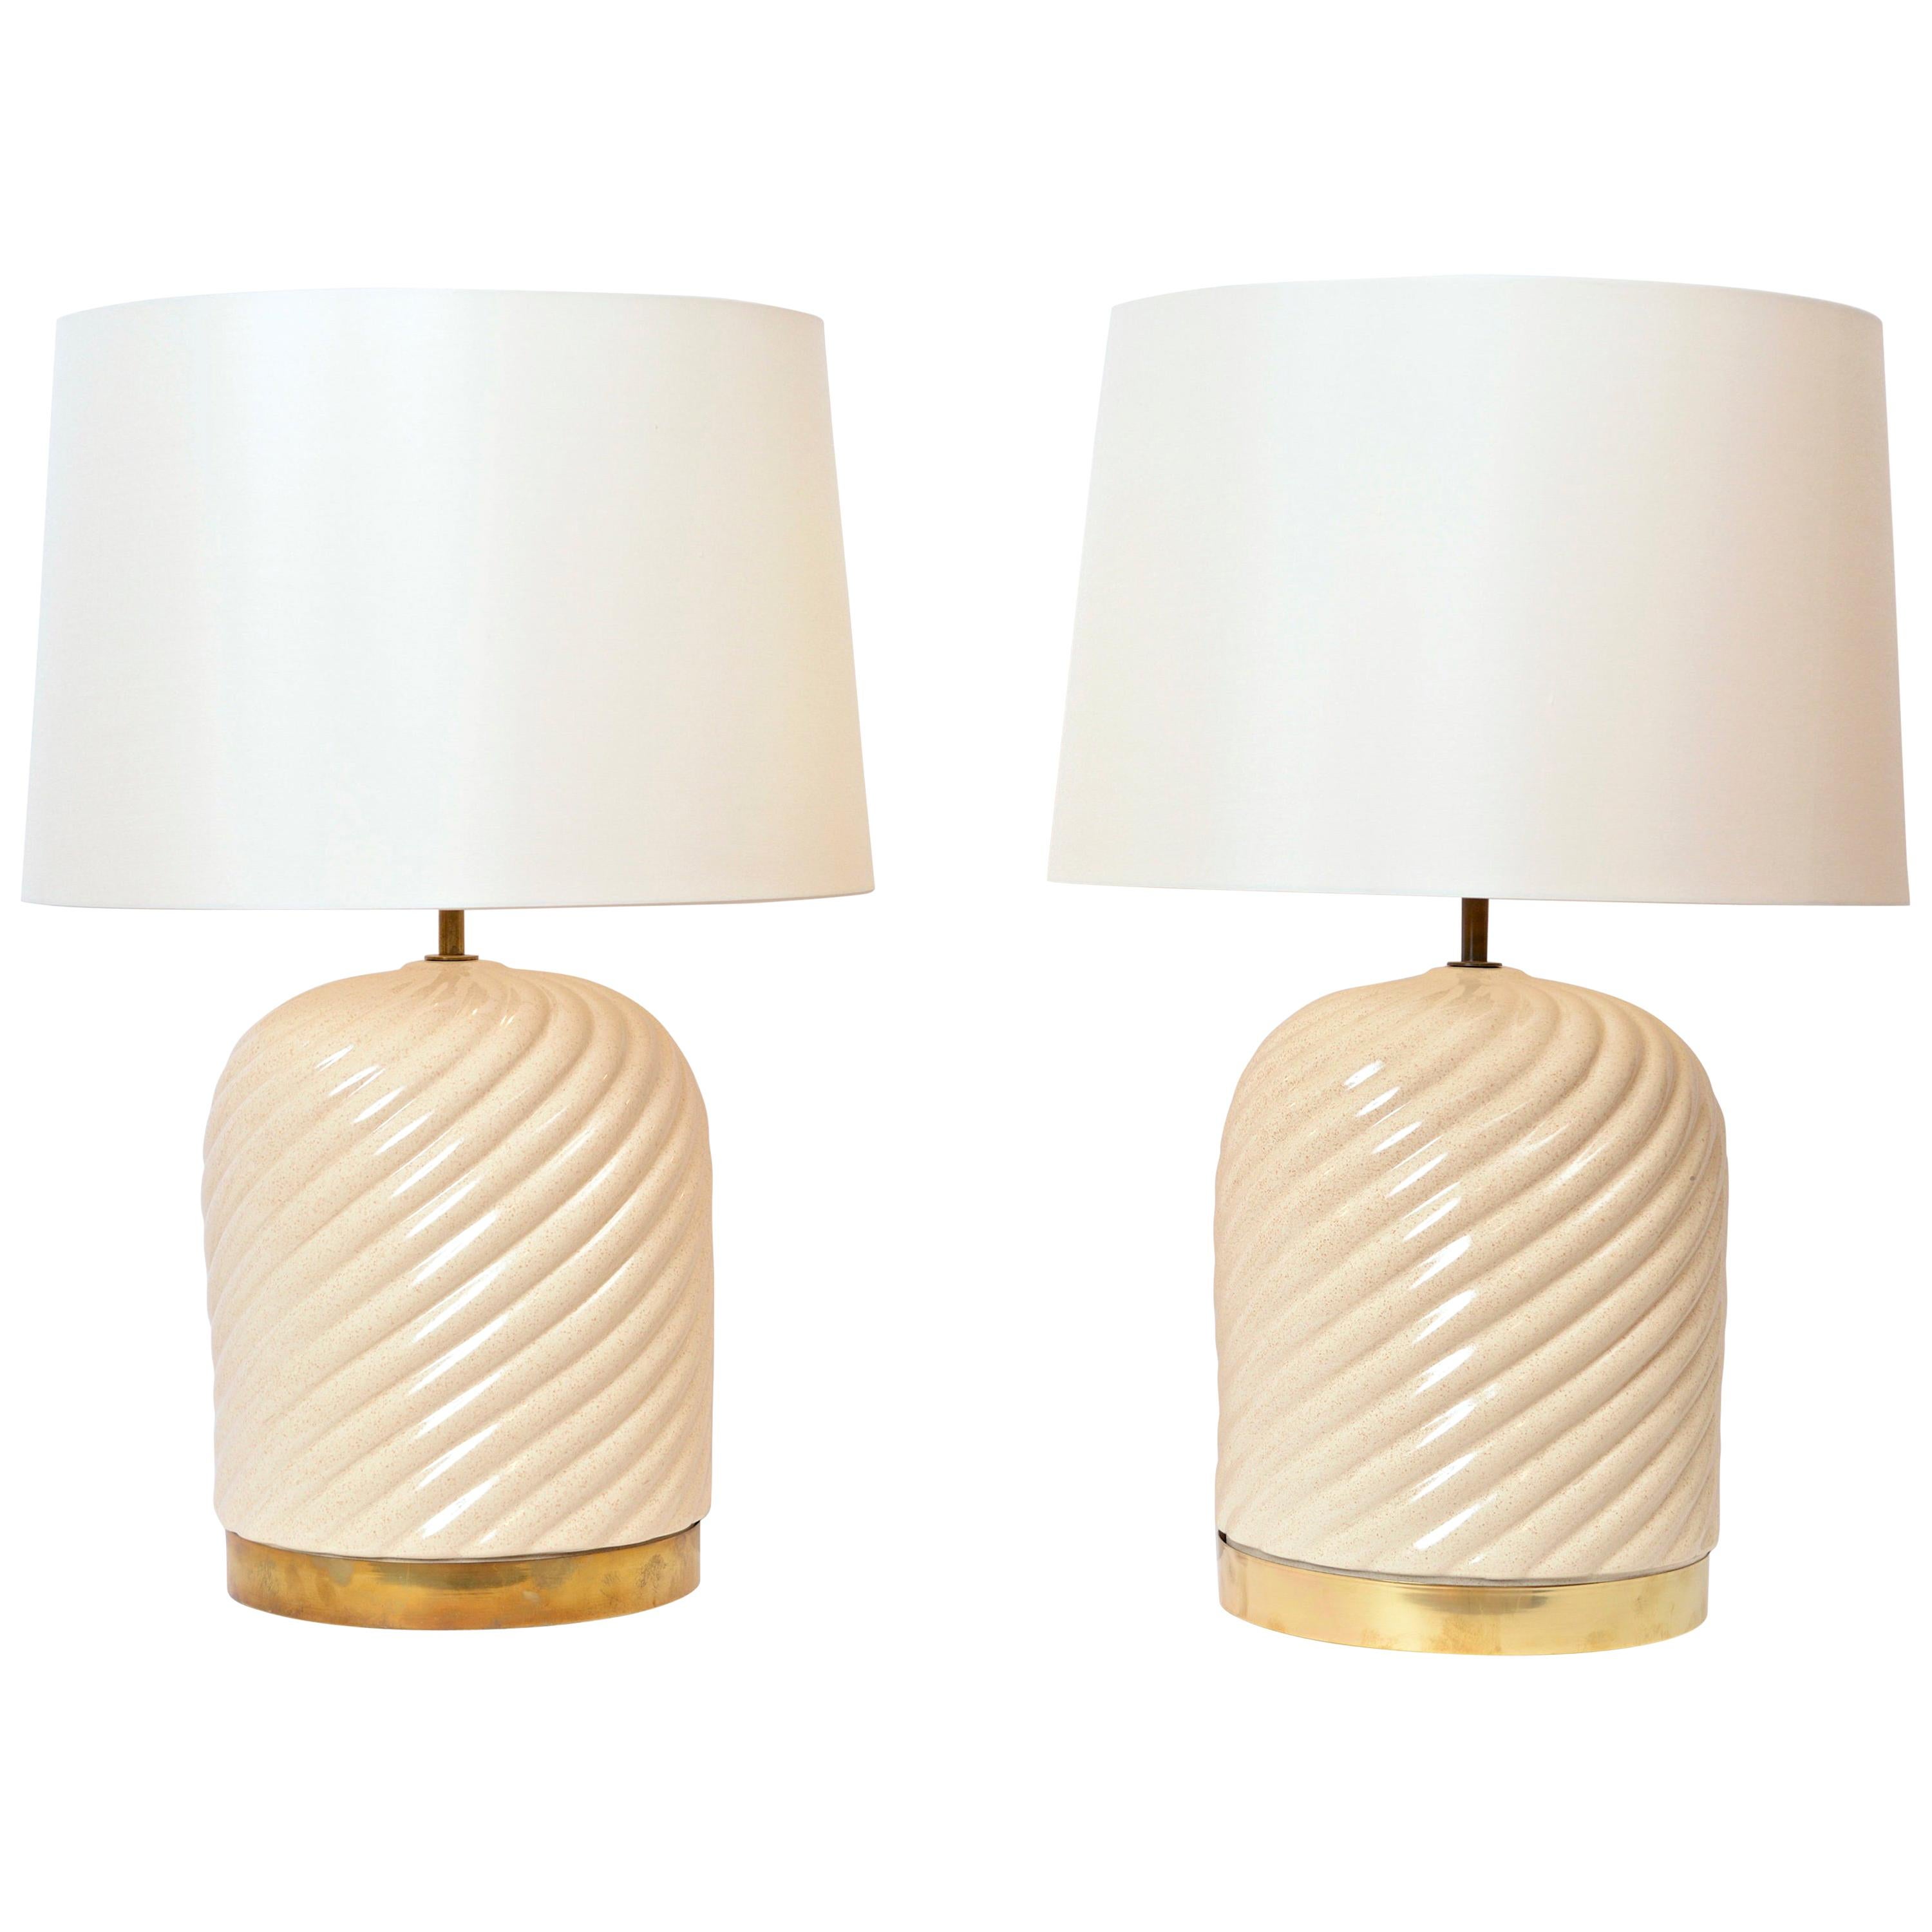 Pair of Midcentury Cream Ceramic Table Lamps by Tommaso Barbi, circa 1970